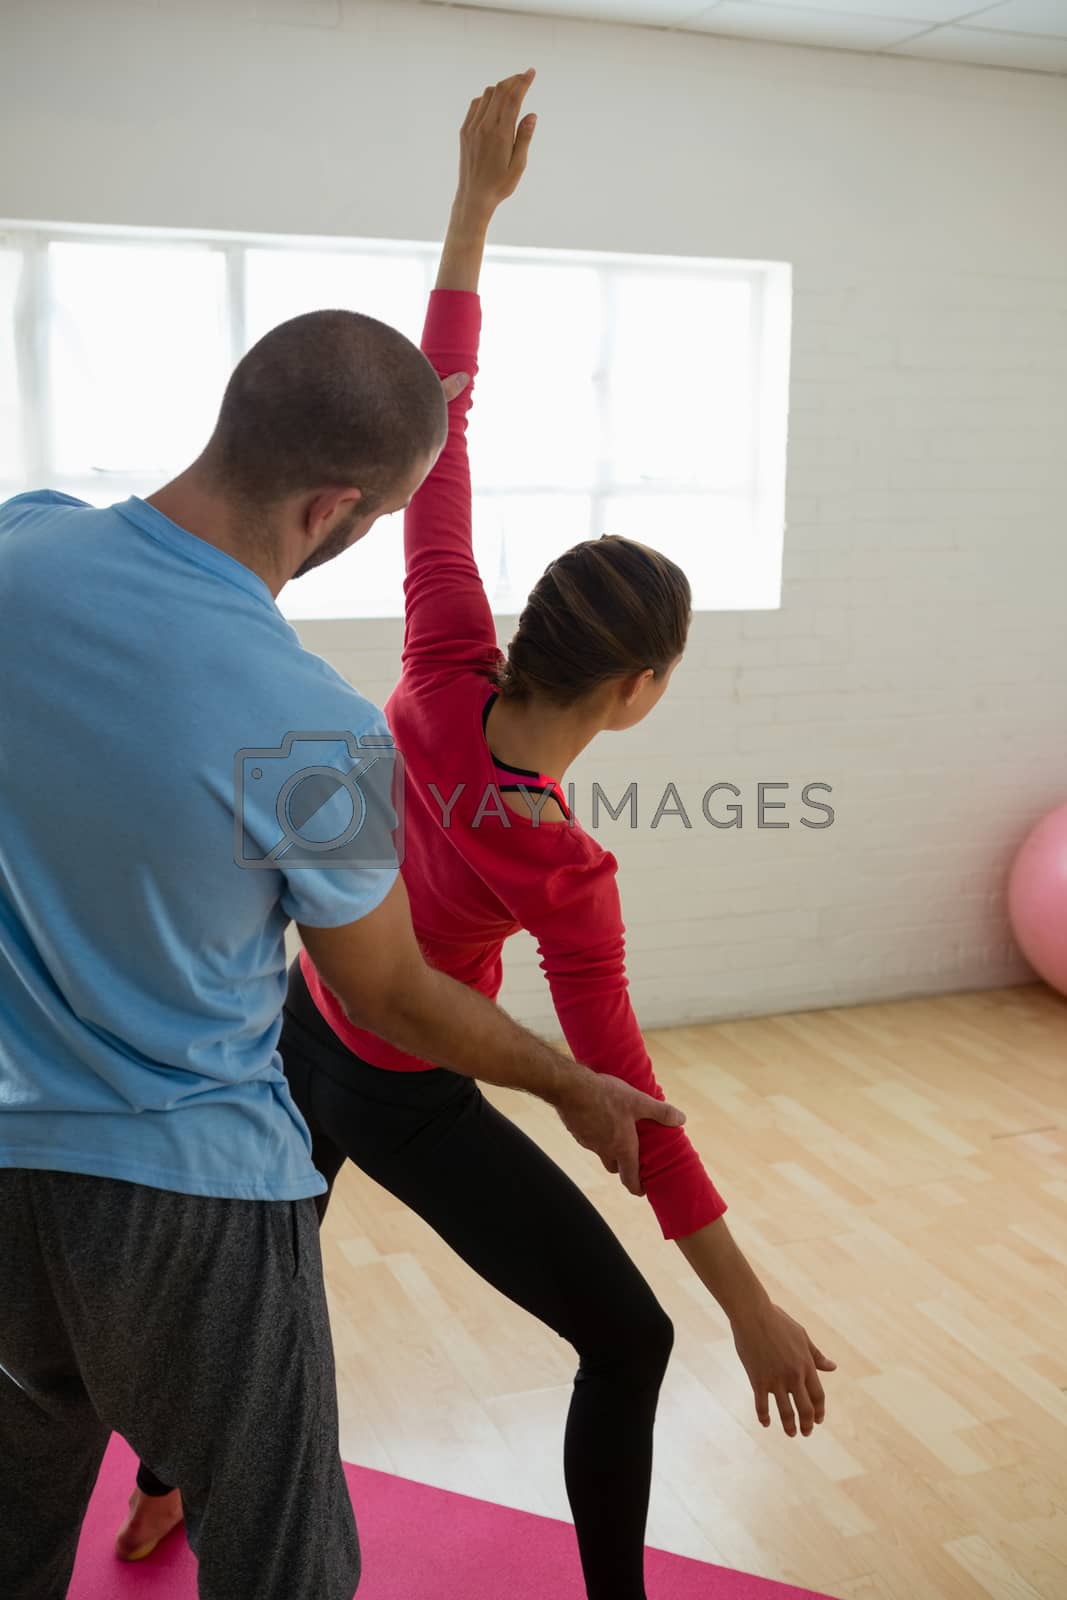 Royalty free image of Yoga instructor assisting student in exercising at health club by Wavebreakmedia